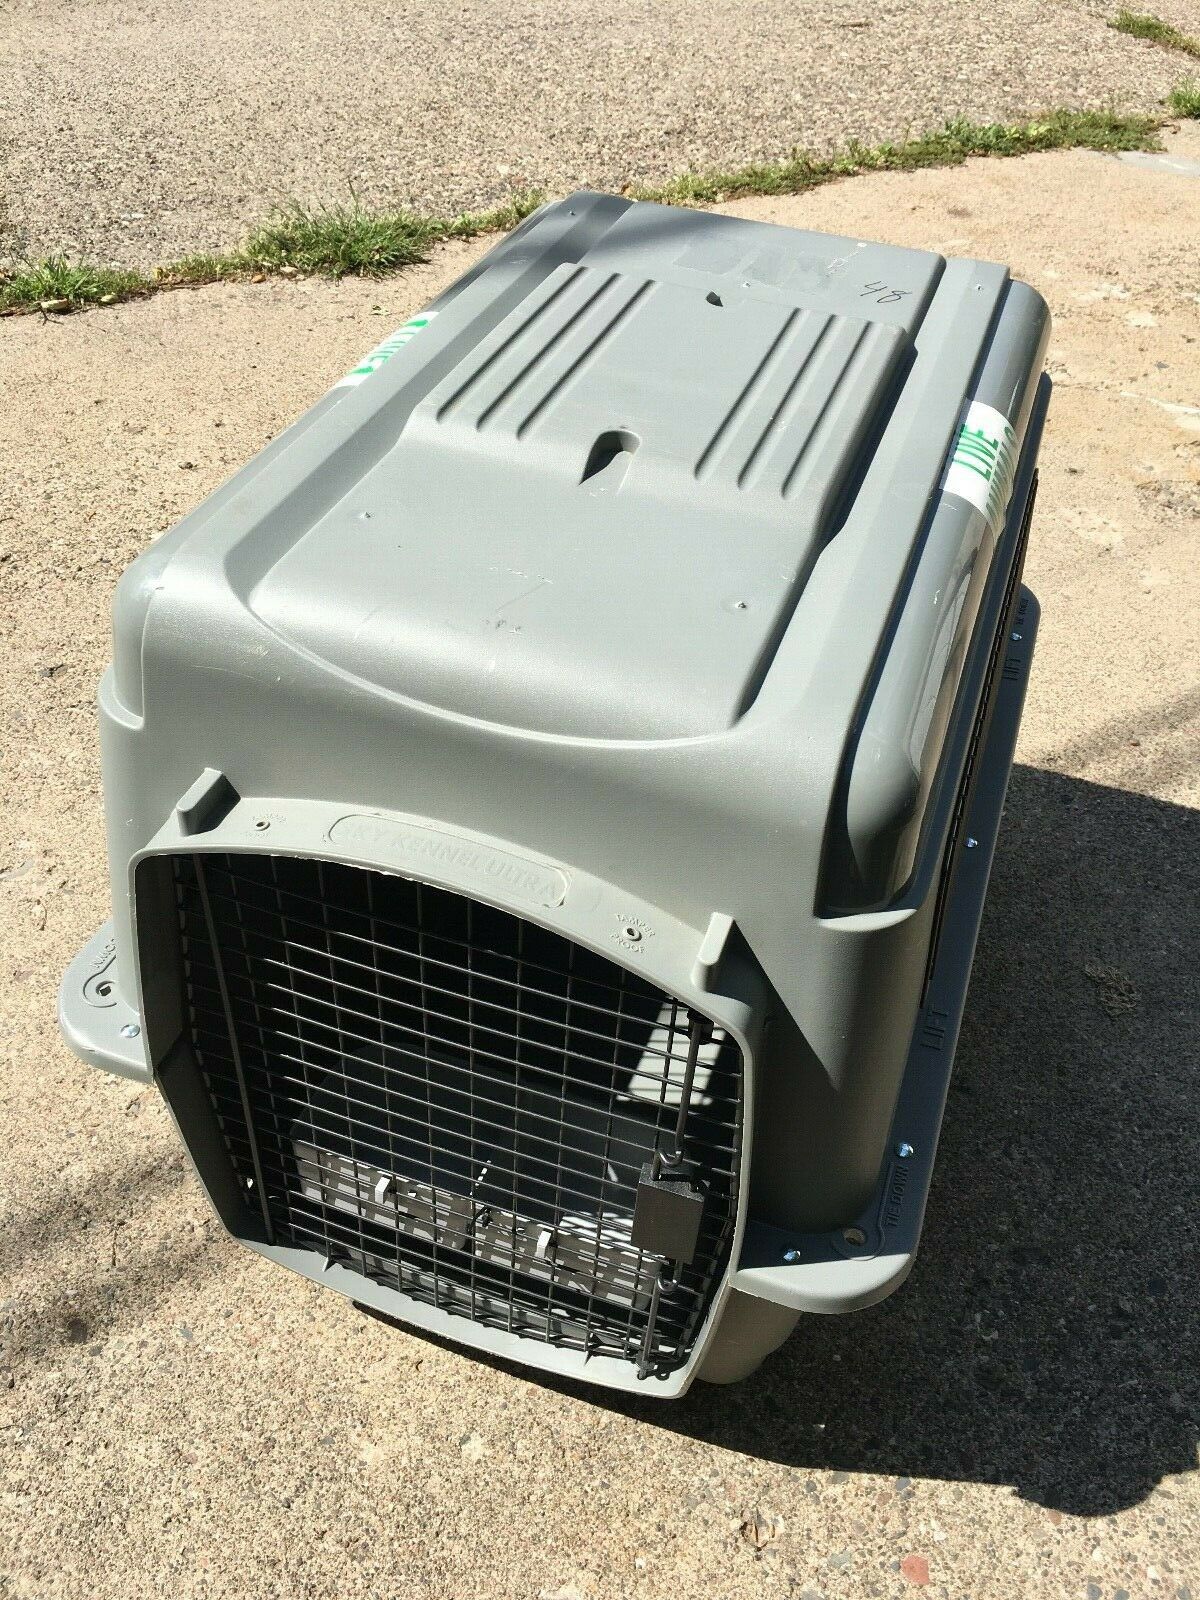 Petmate Sky Kennel 32" For Dogs 30 - 50 Lbs. Used Once.